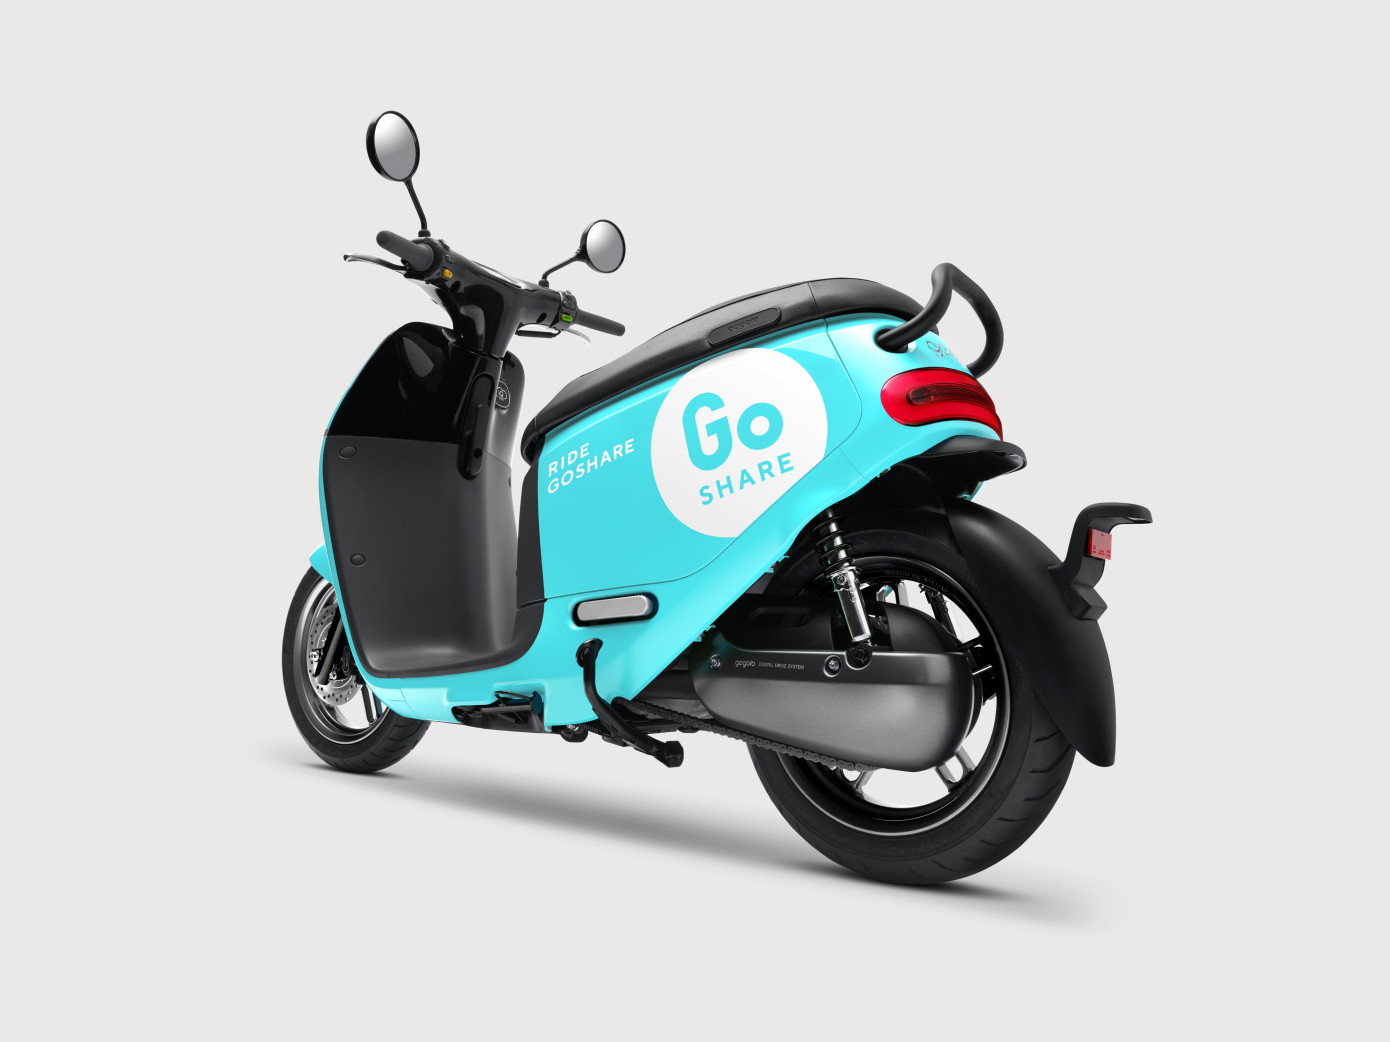 Yamaha, Aeon and PGO announced as the first manufacturing partners with Taiwanese EV Gogoro